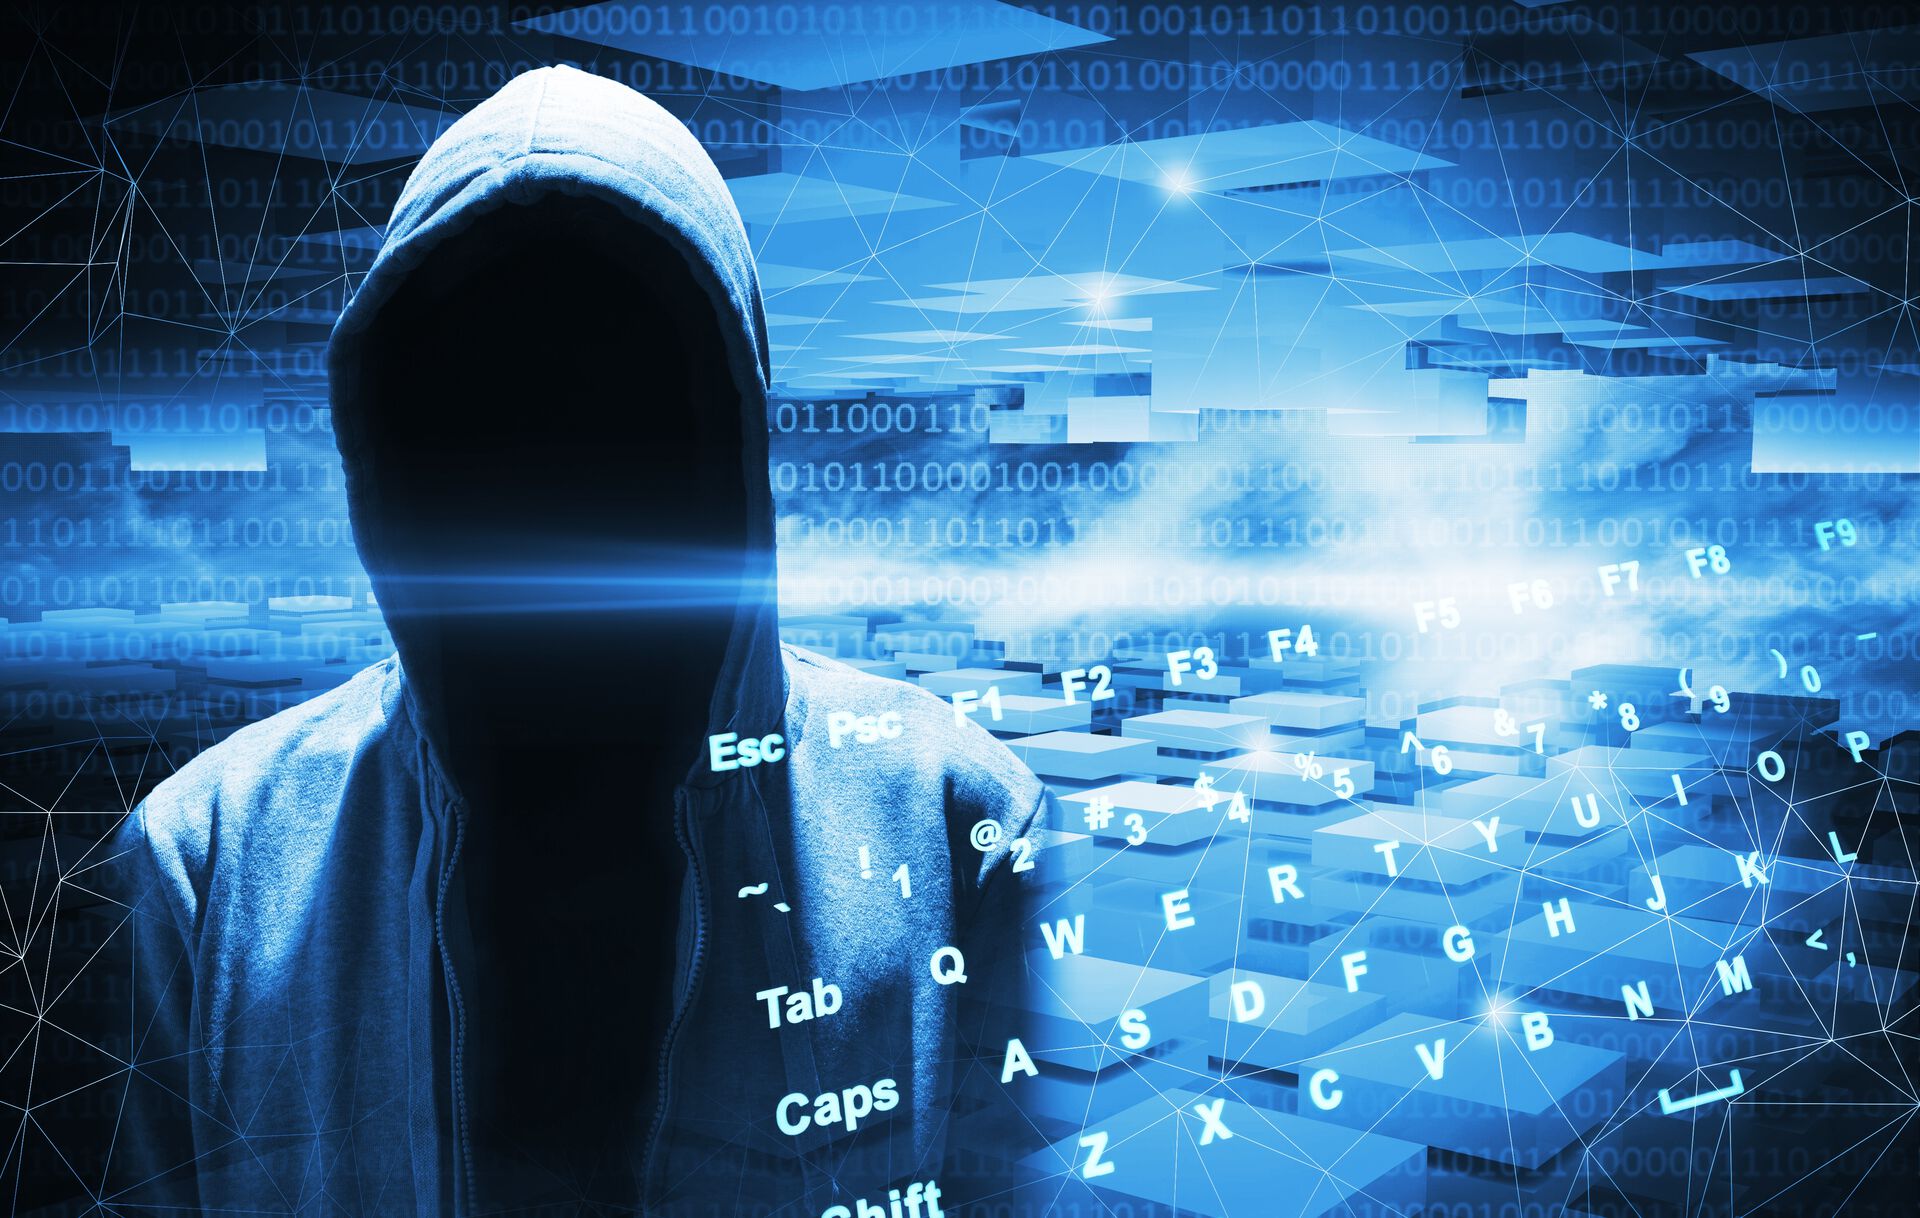 Illustration of a person hiding his face with a hoodie. Computer keyboard and blue shapes.